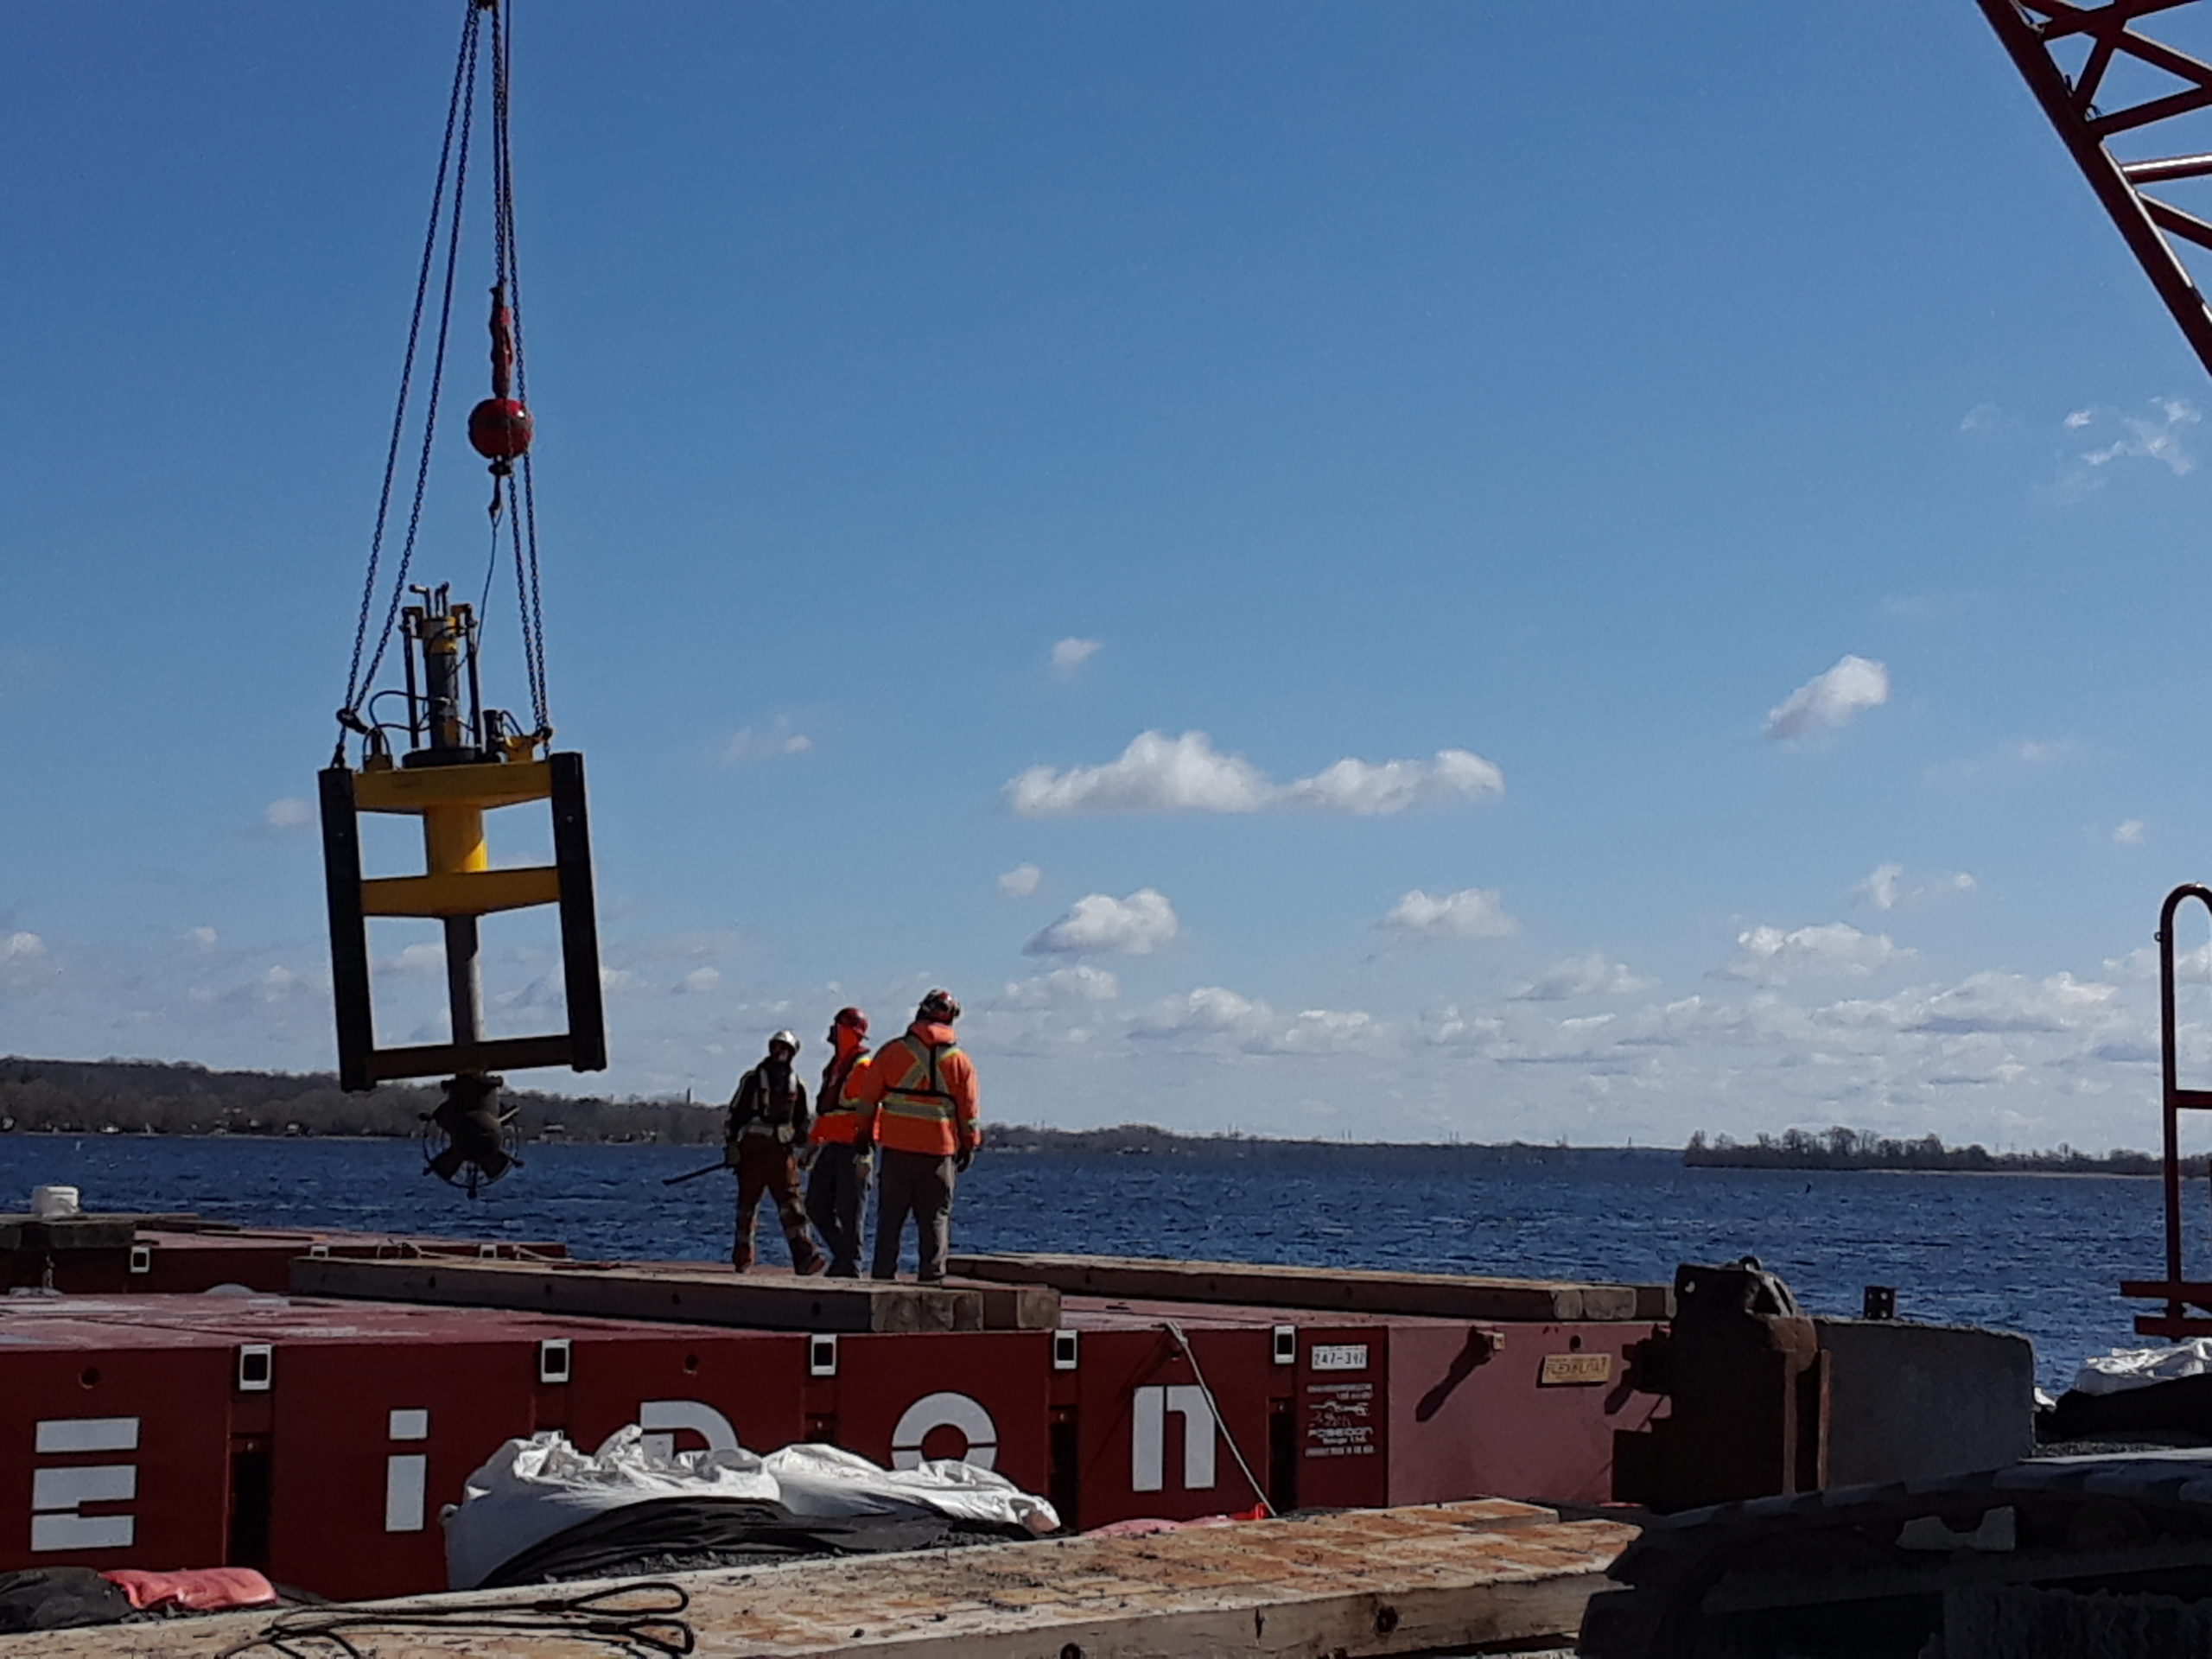 Lowering the propulsion unit for installation on the barge